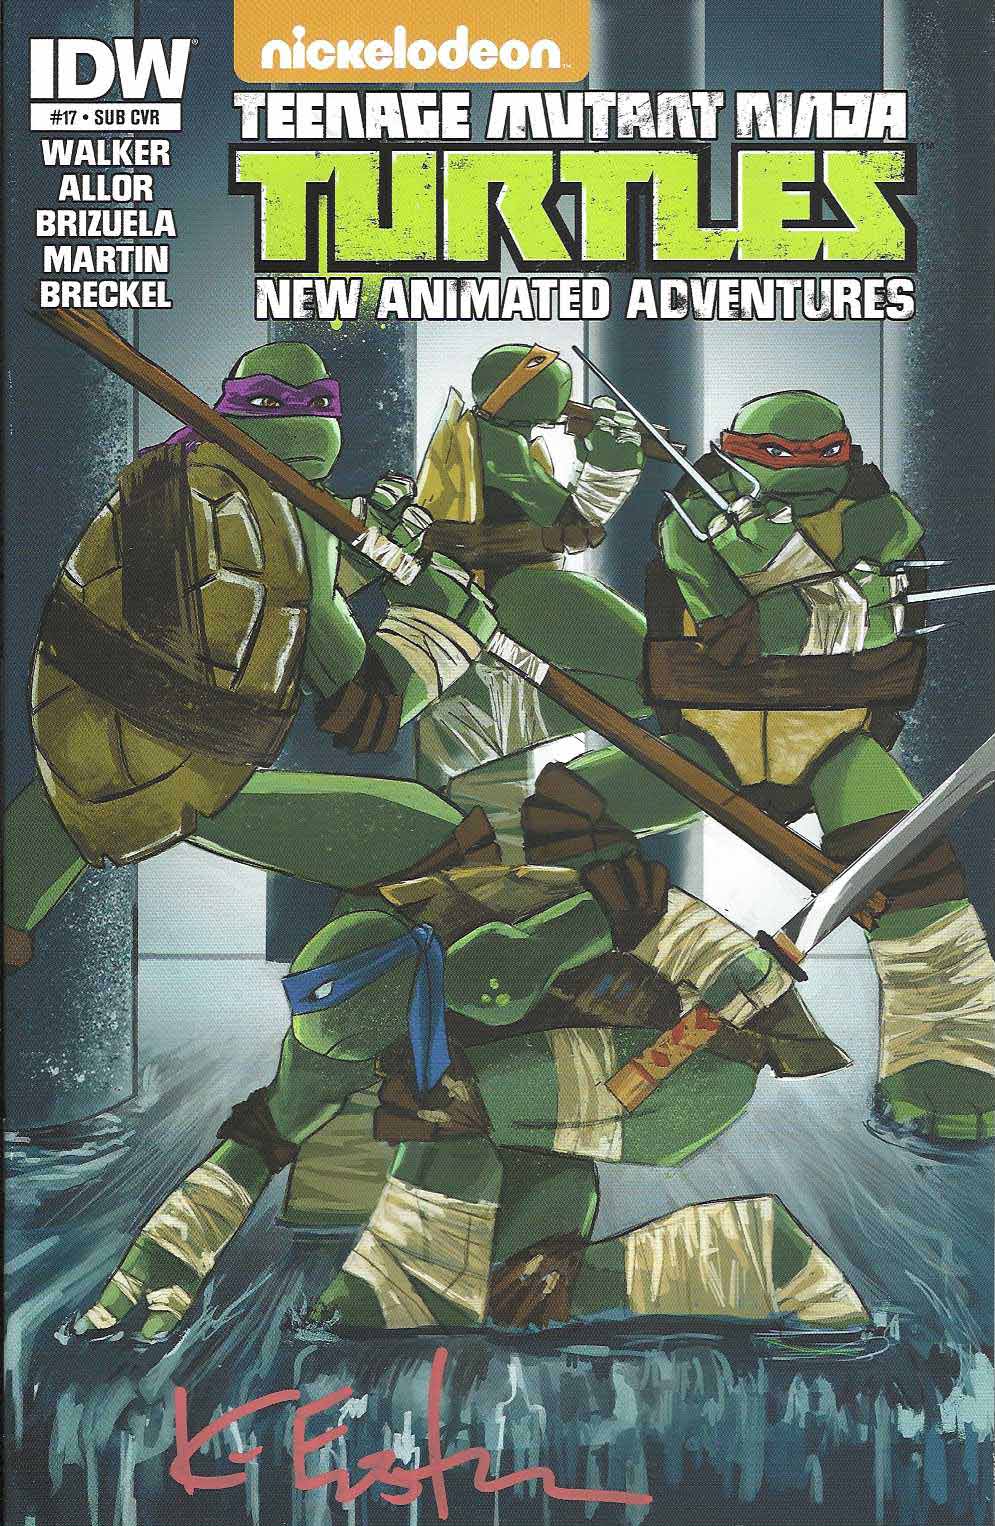 TMNT New Animated Adventures #17- Cover – Signed